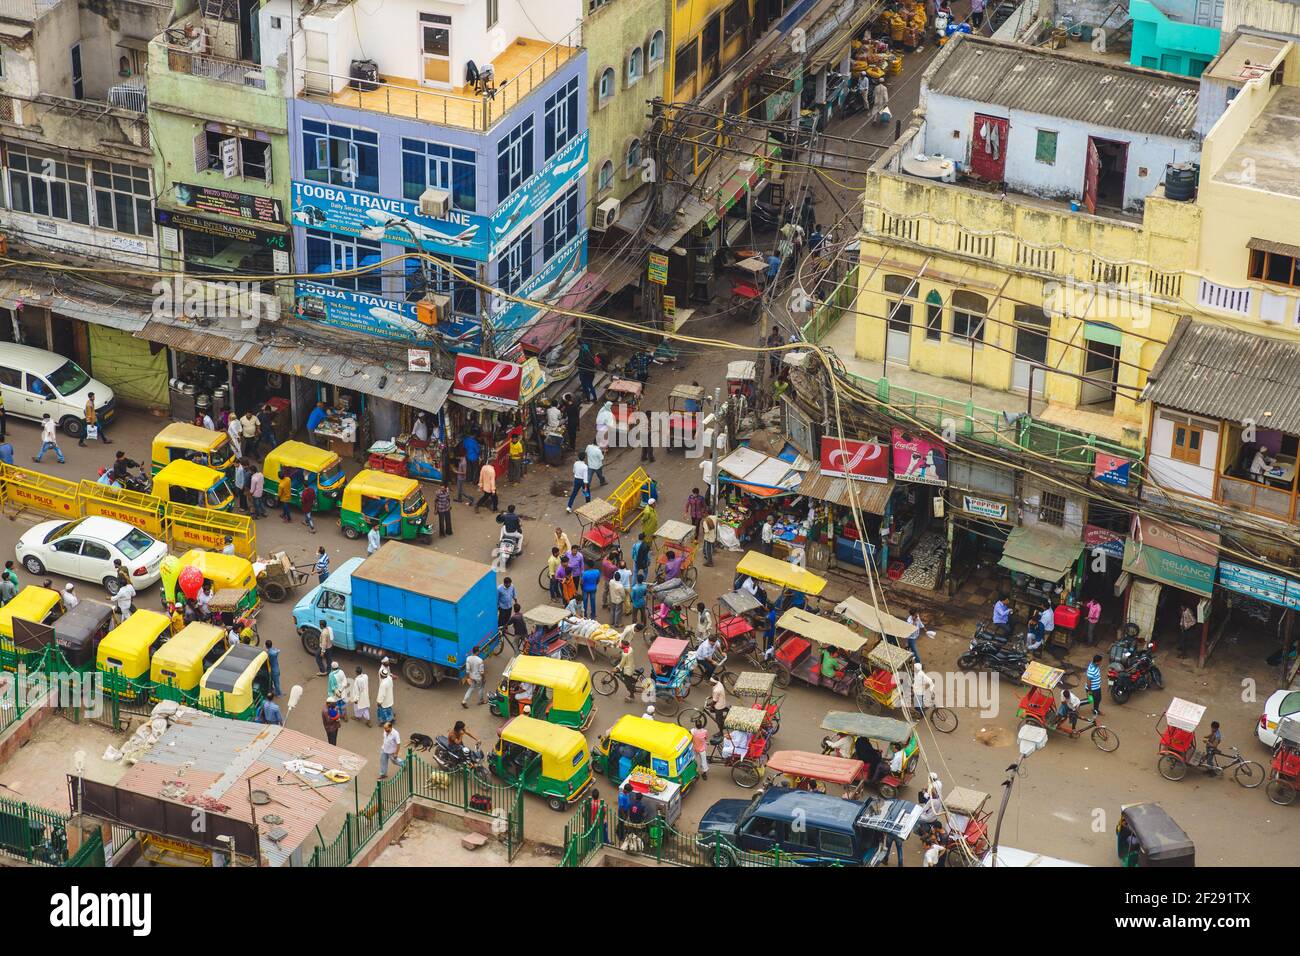 October 10, 2016: view over delhi near Chandni Chowk. Chandni Chowk, aka Moonlight Square, is one of the oldest and busiest markets in Old Delhi, Indi Stock Photo